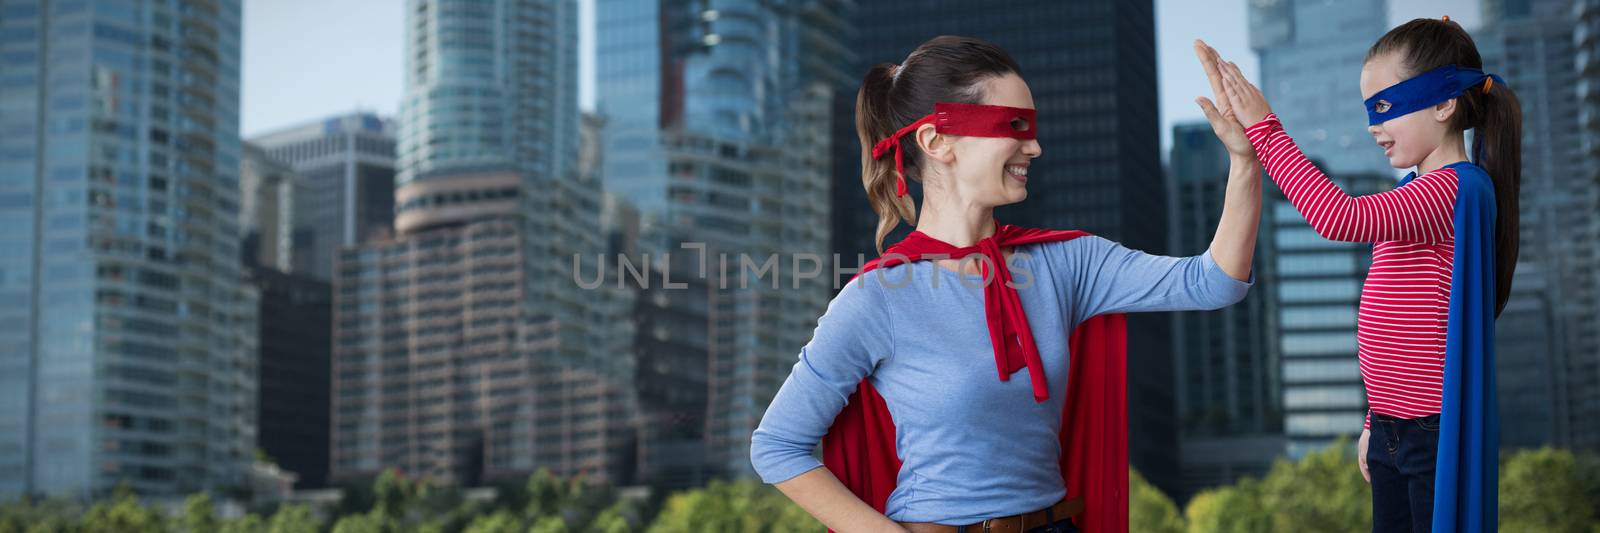 Composite image of mother and daughter pretending to be superhero by Wavebreakmedia